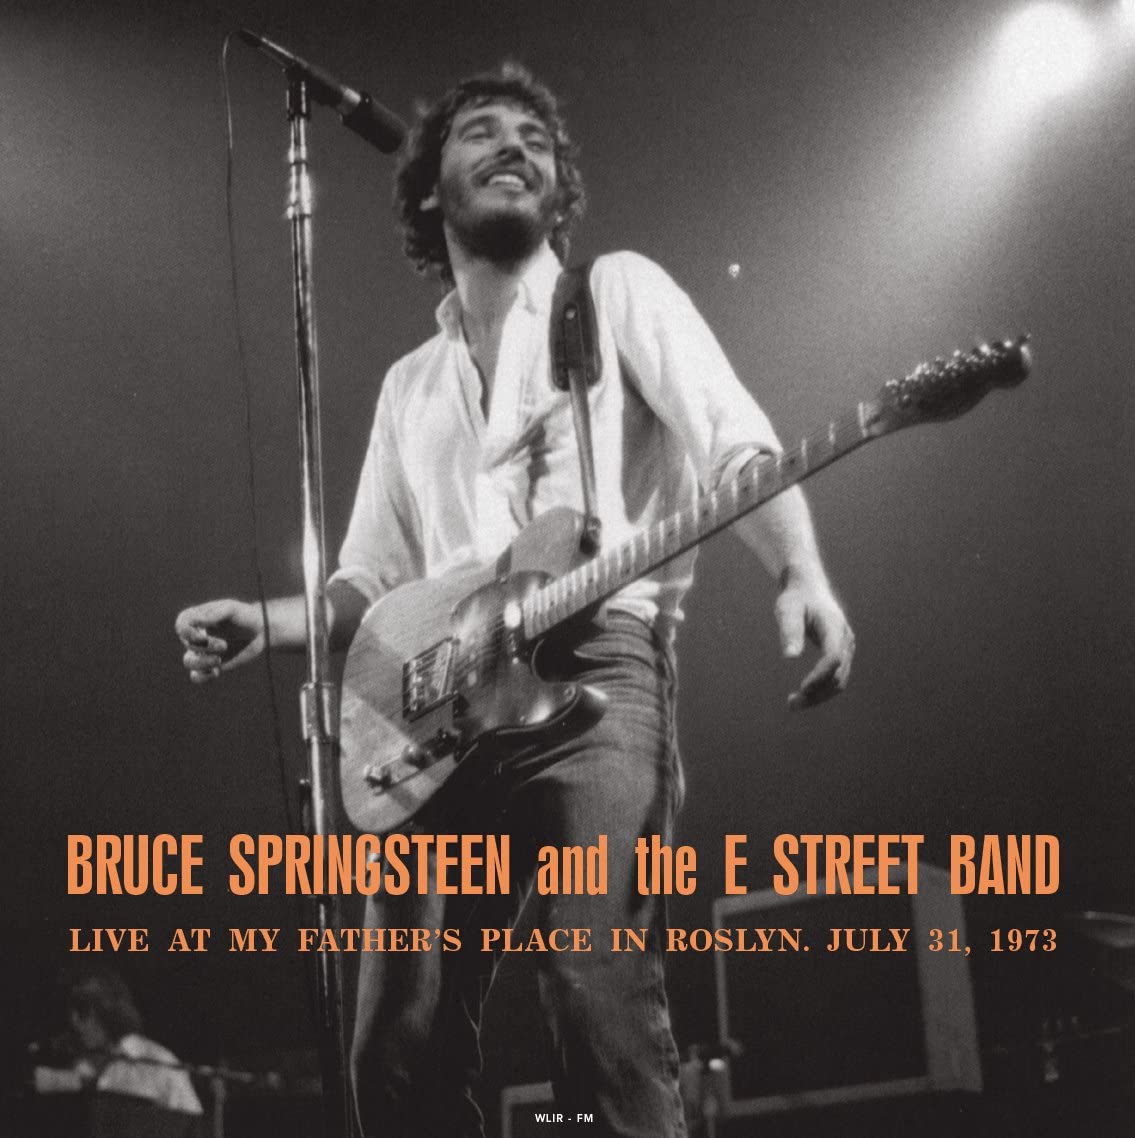 Bruce Springsteen & The E Street Band Live At My Father'S Place In Roslyn Ny July 31 1973 Wlir-Fm Vinyl